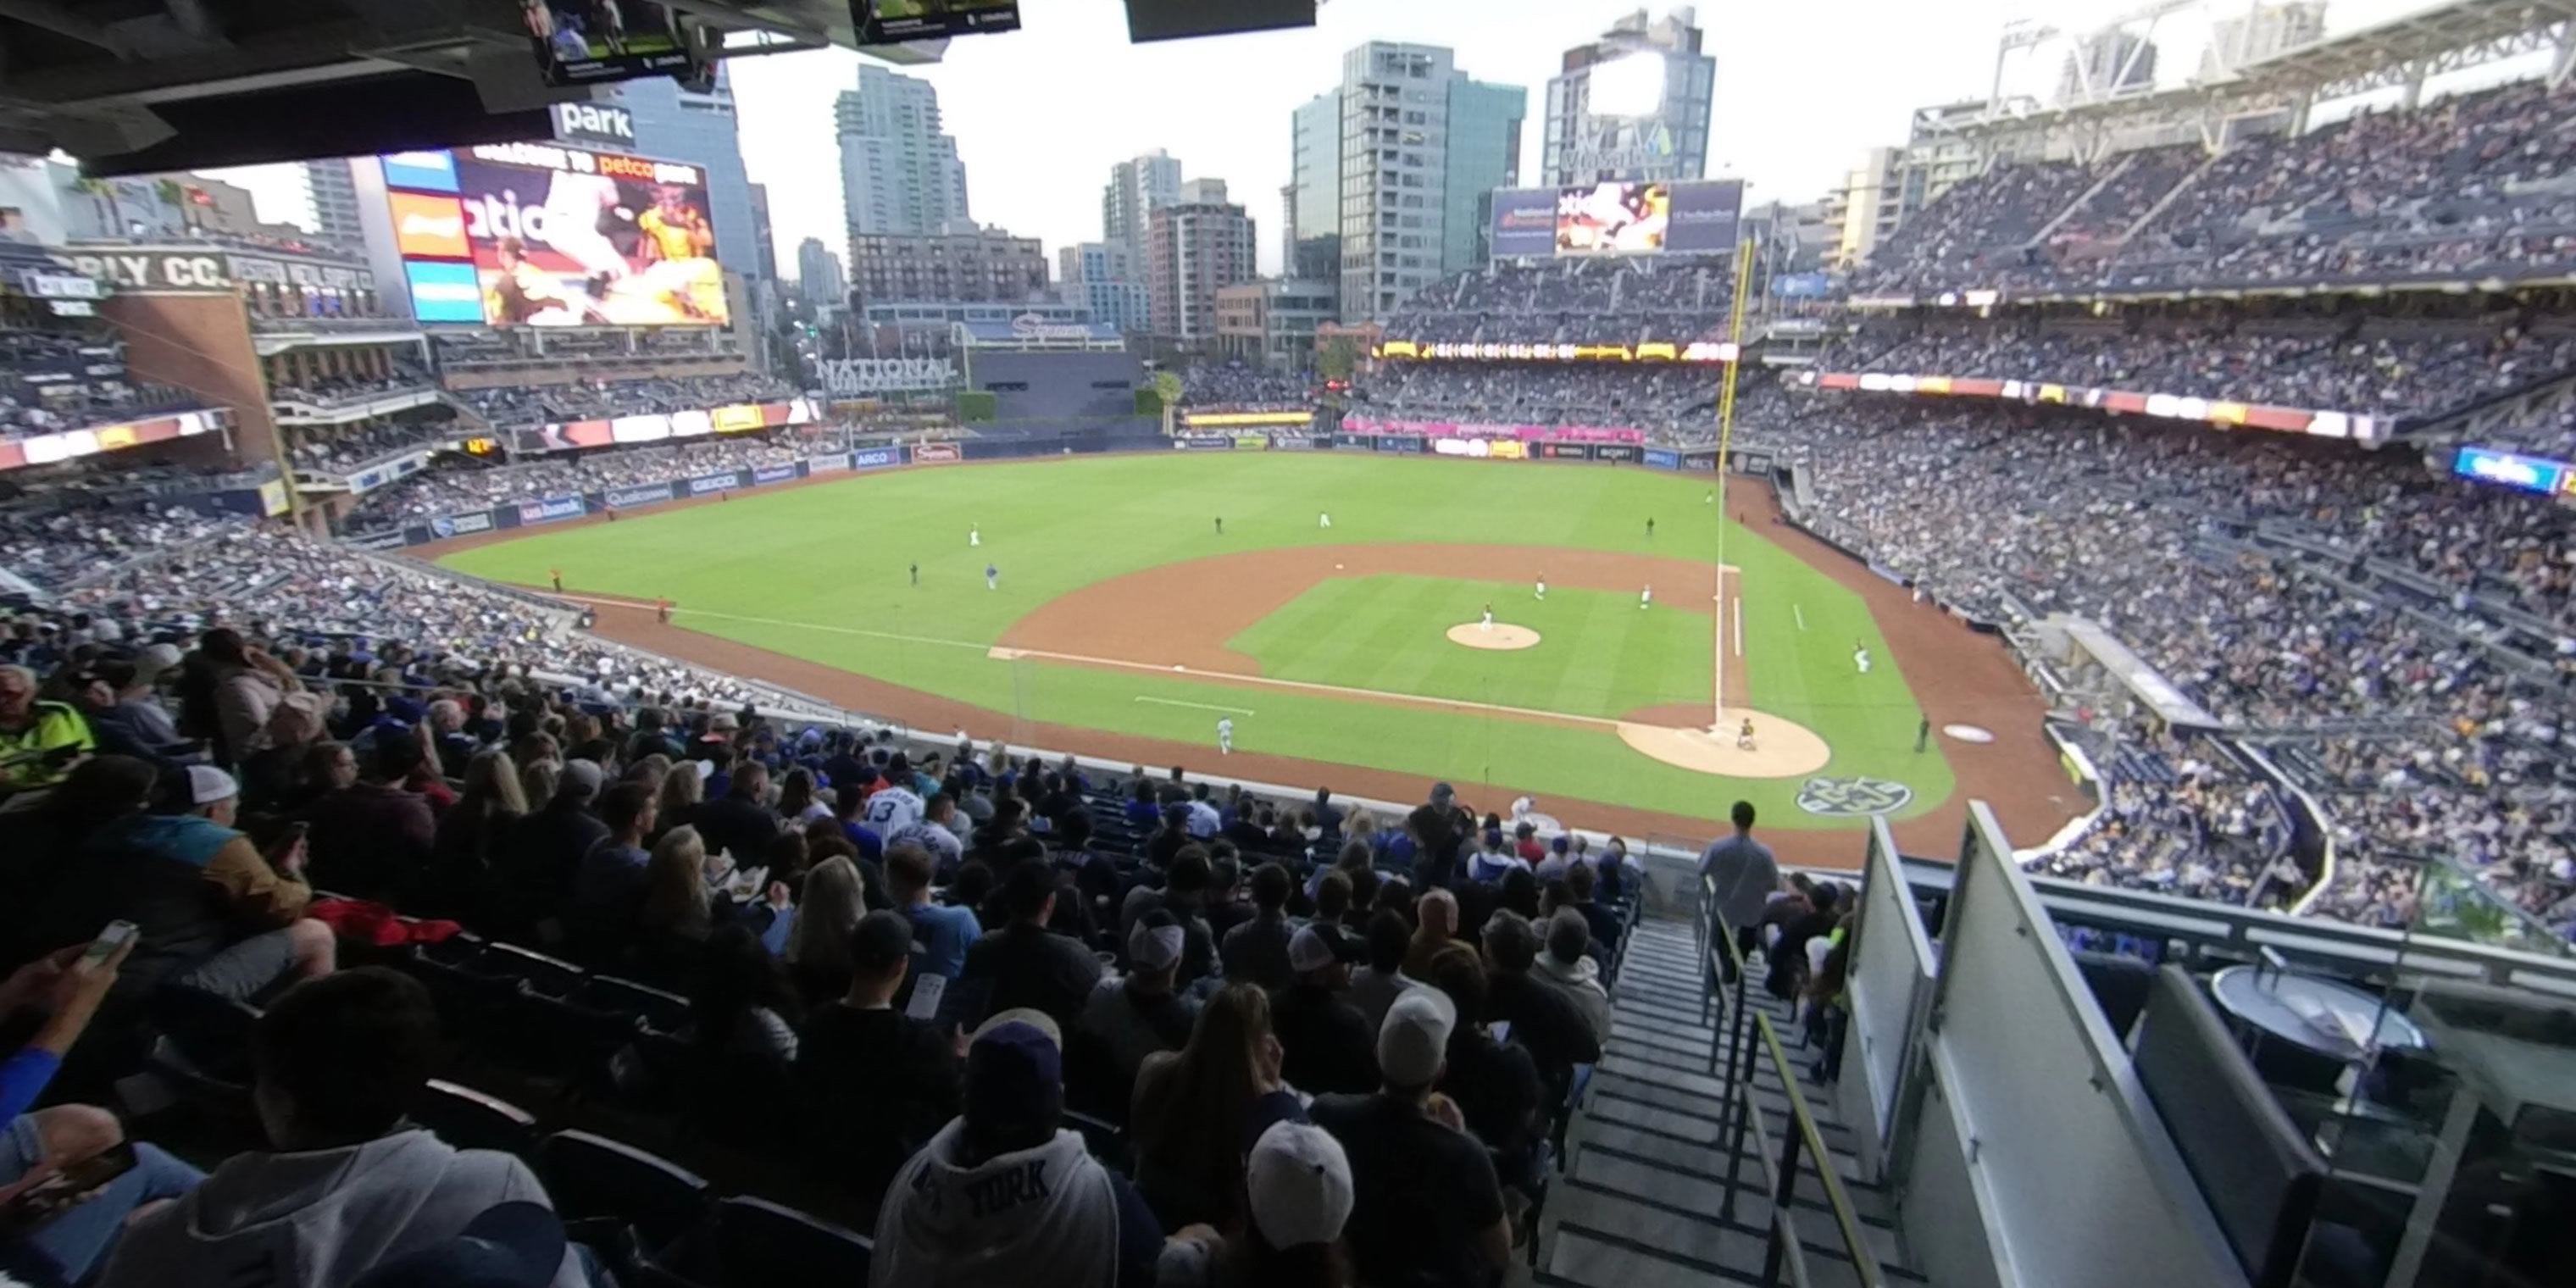 section 204 panoramic seat view  for baseball - petco park